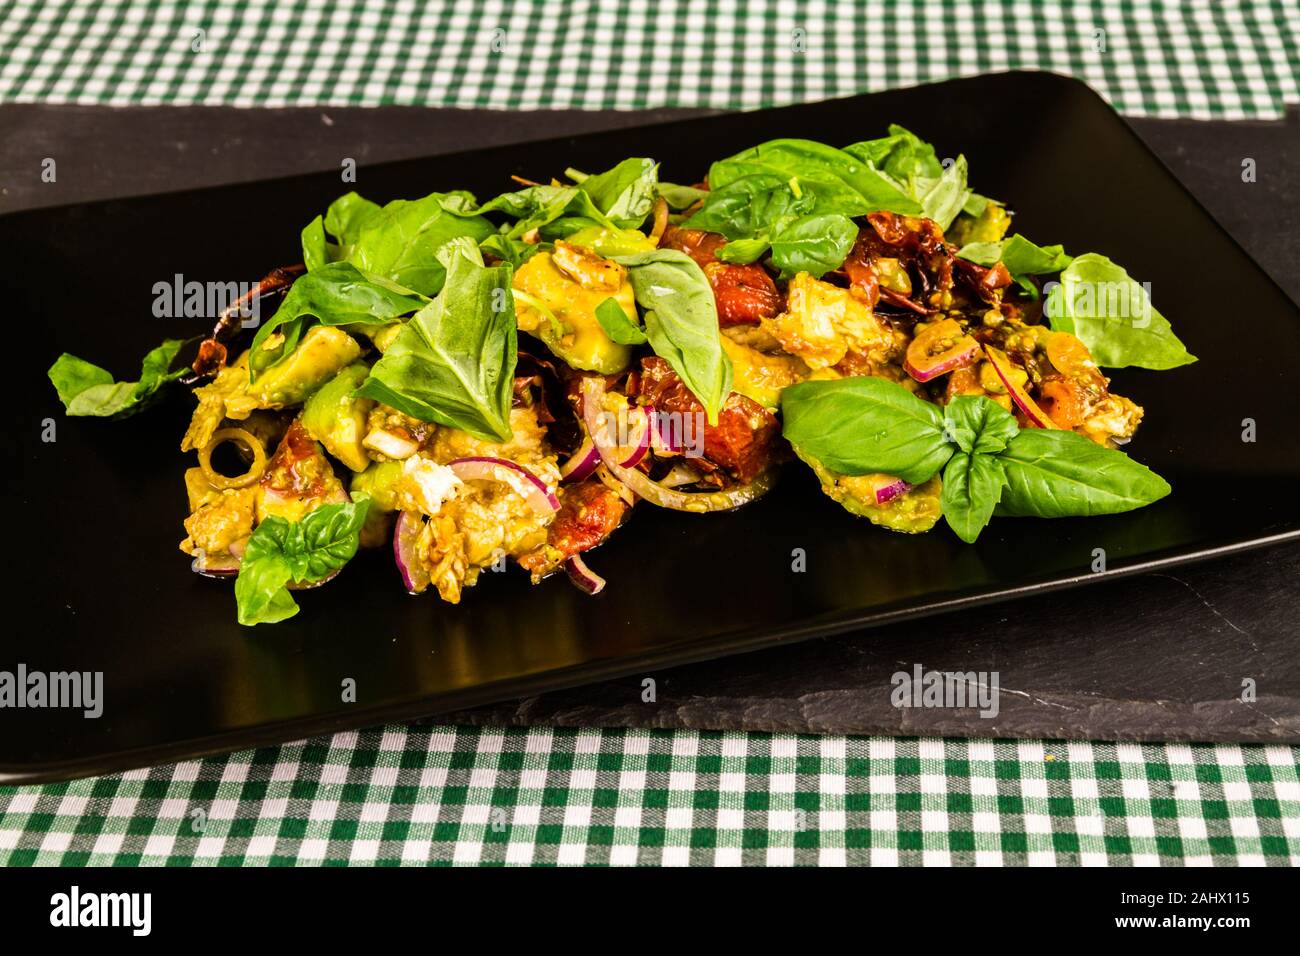 Dressed Salad on black plate with avocado, sun dried tomato, red onion, feta and basil, landscape on plate on slate Stock Photo